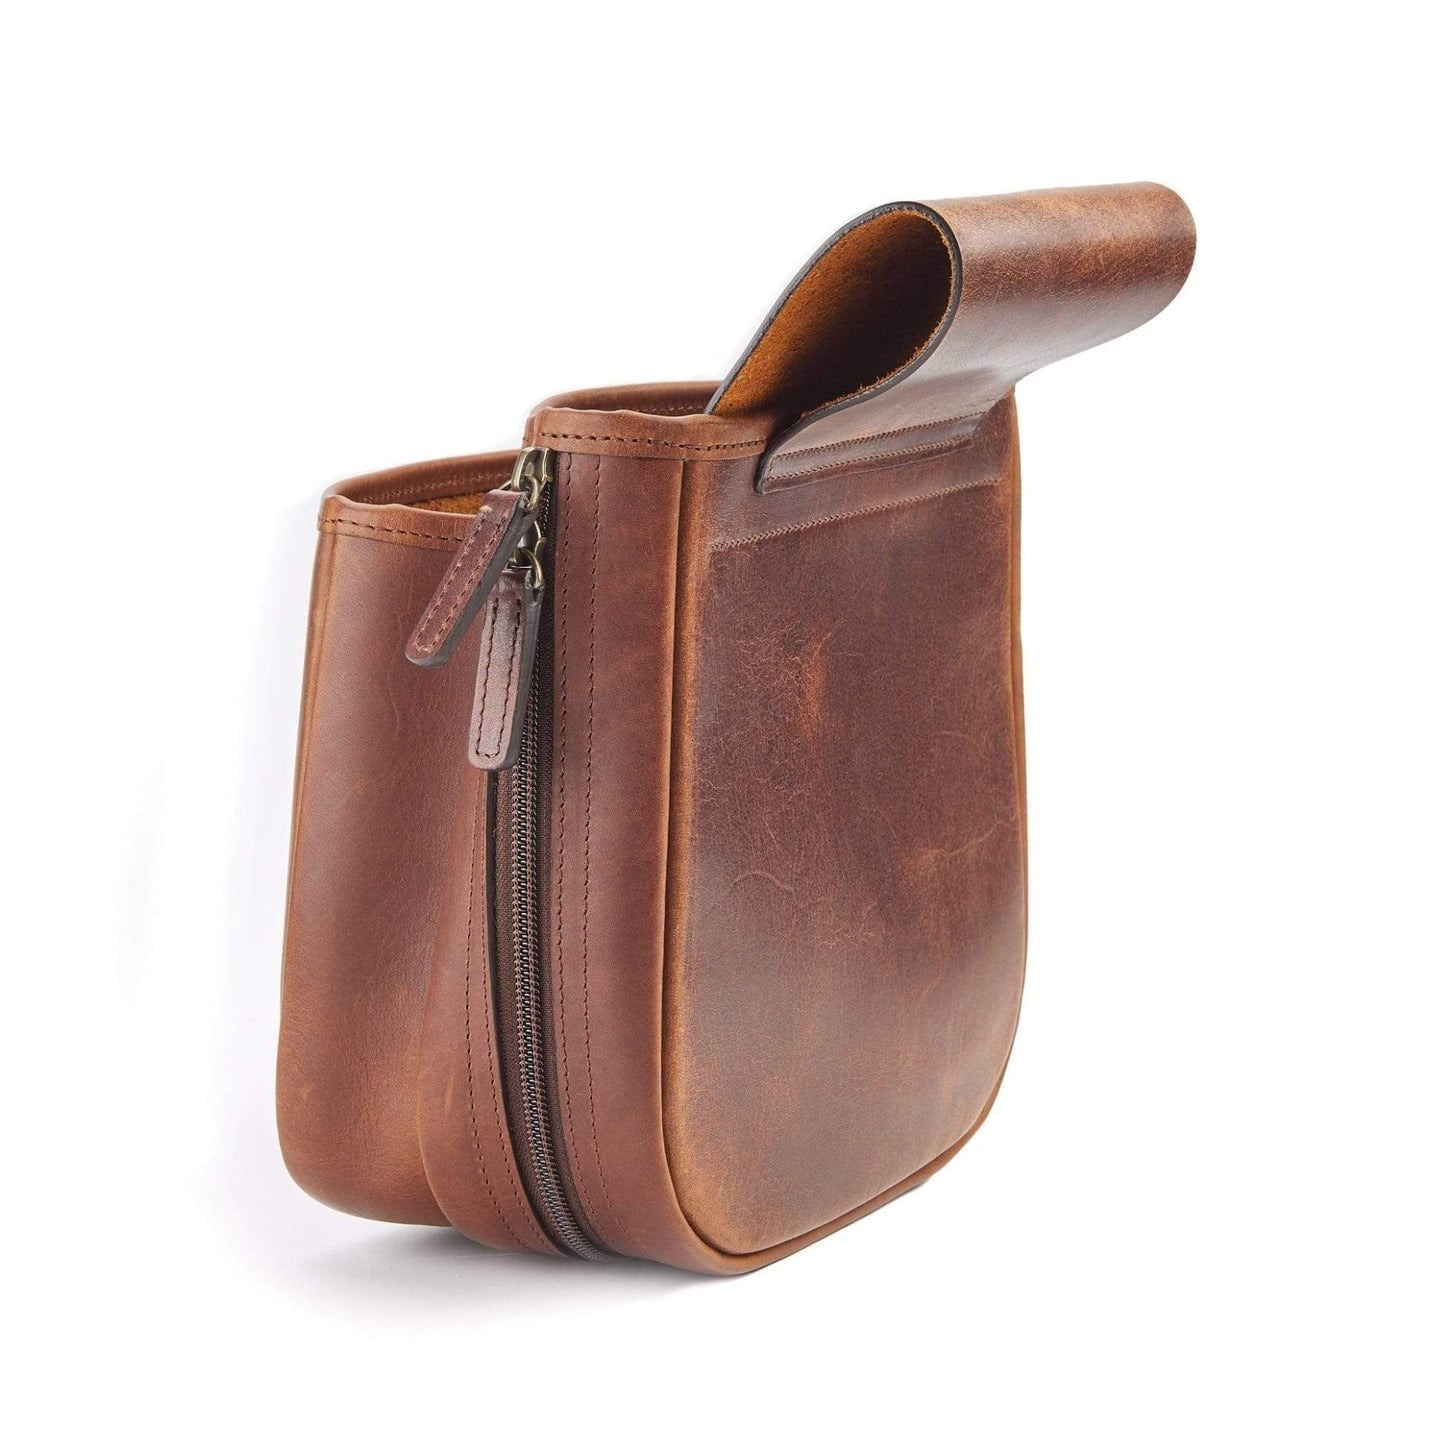 Sold - Weaver Leathercraft shell pouch